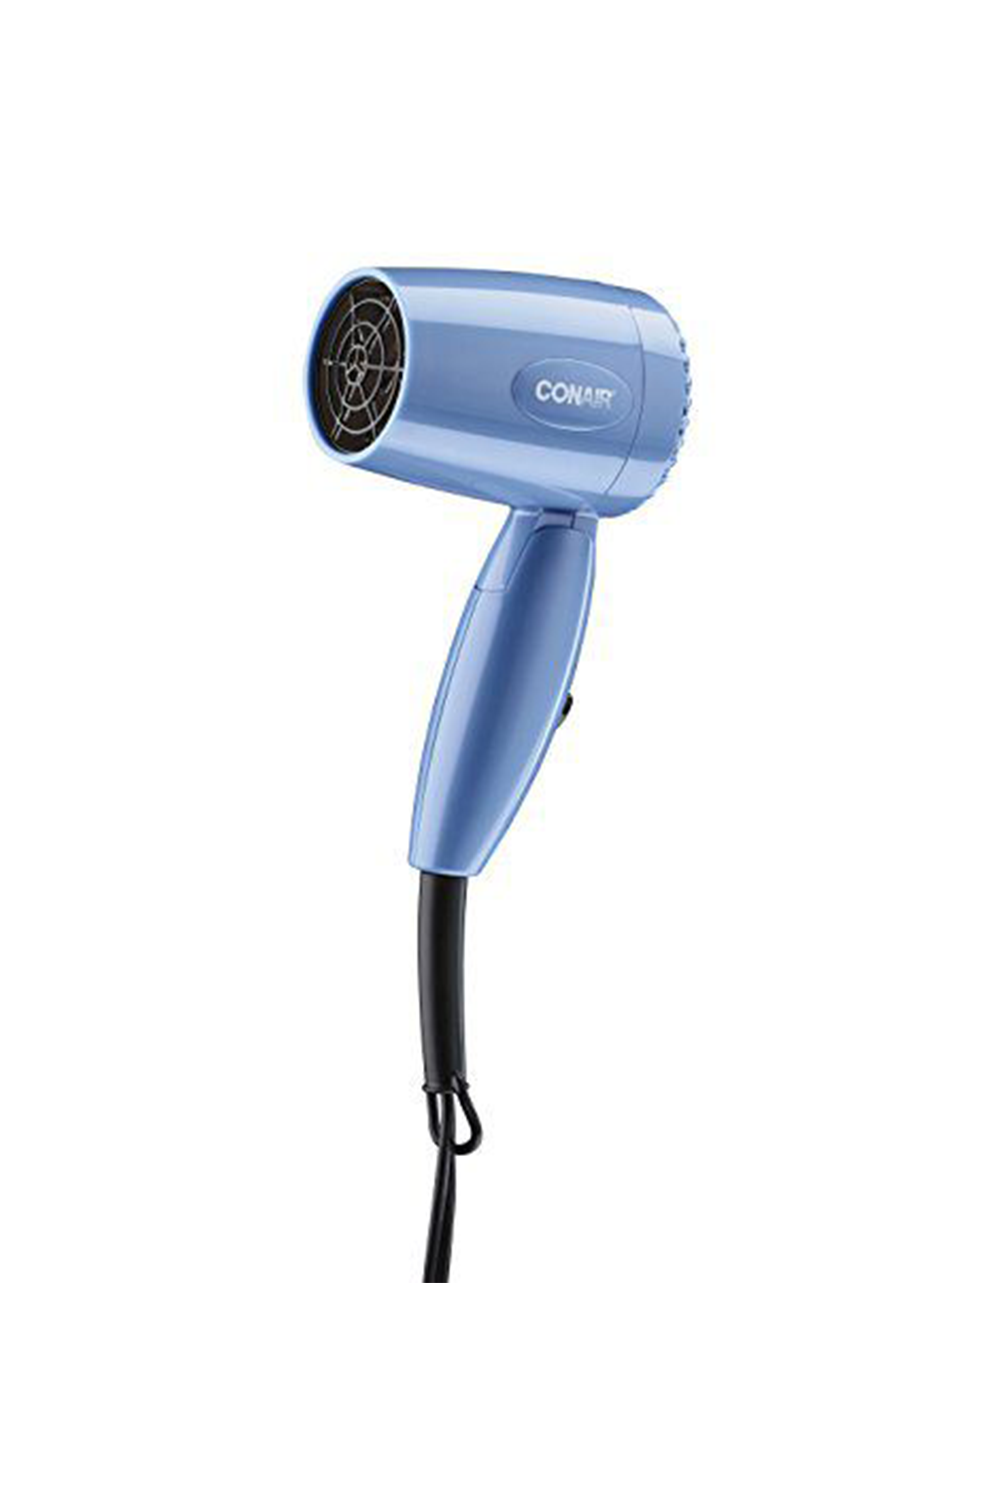 20 Best Hair Dryers 2022 - Top-Rated Blow-Dryers